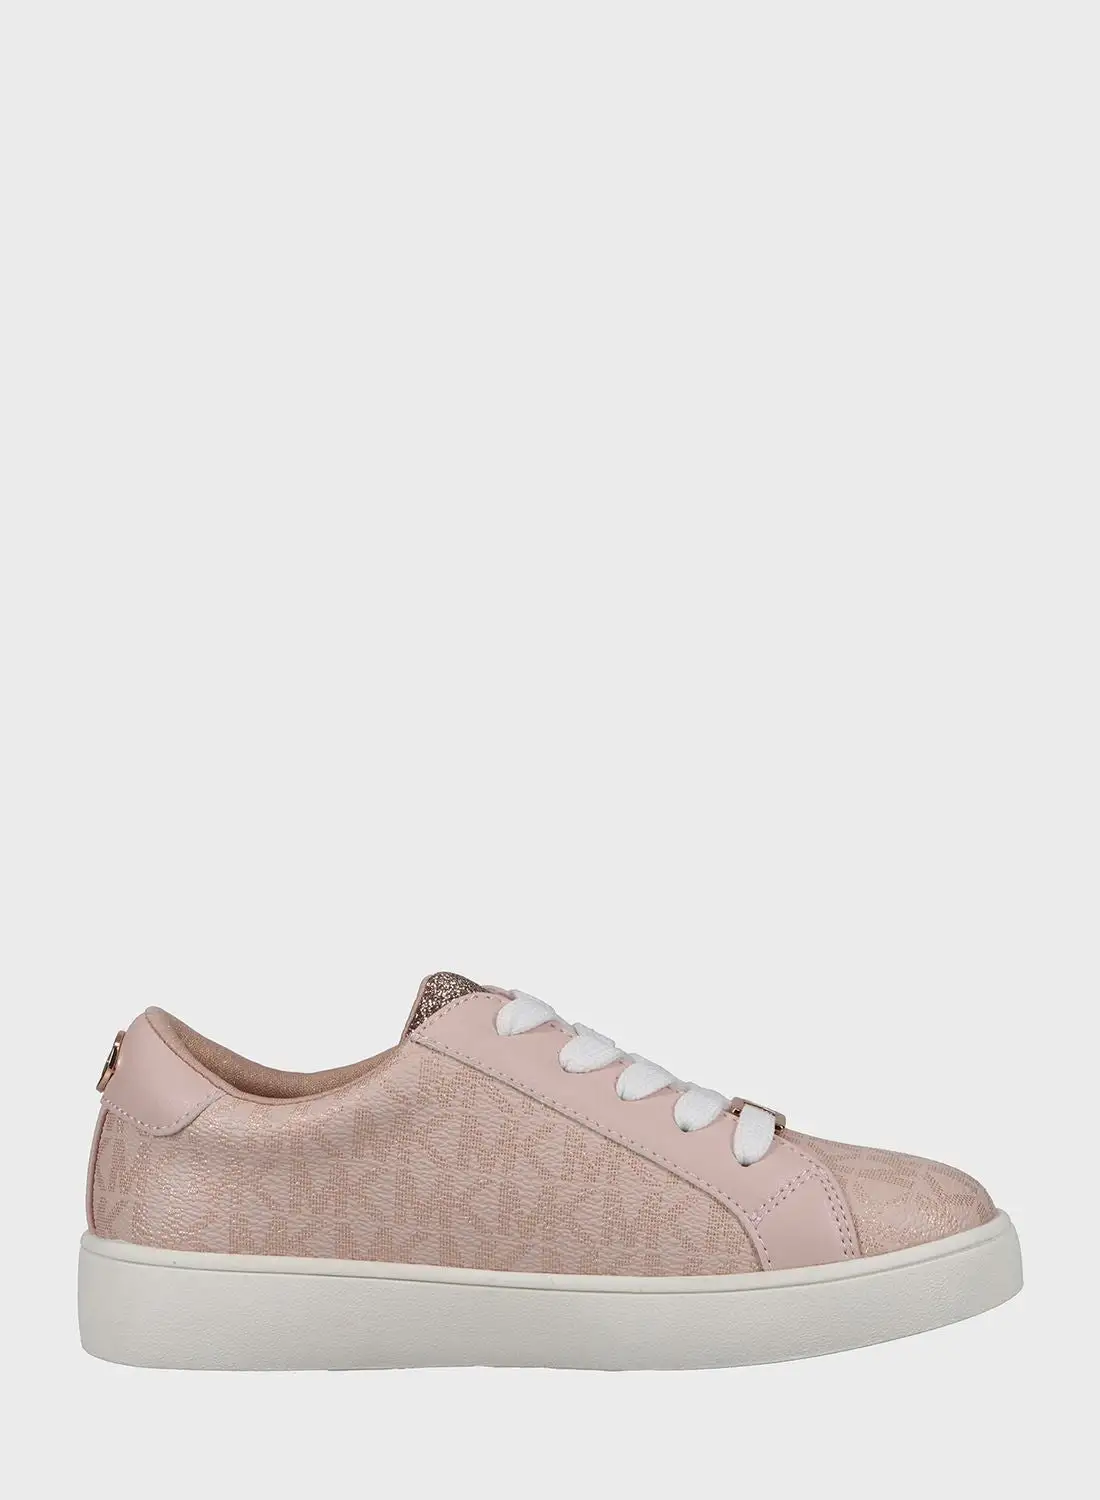 Michael Kors Youth Jem Slade Lace Up Sneakers